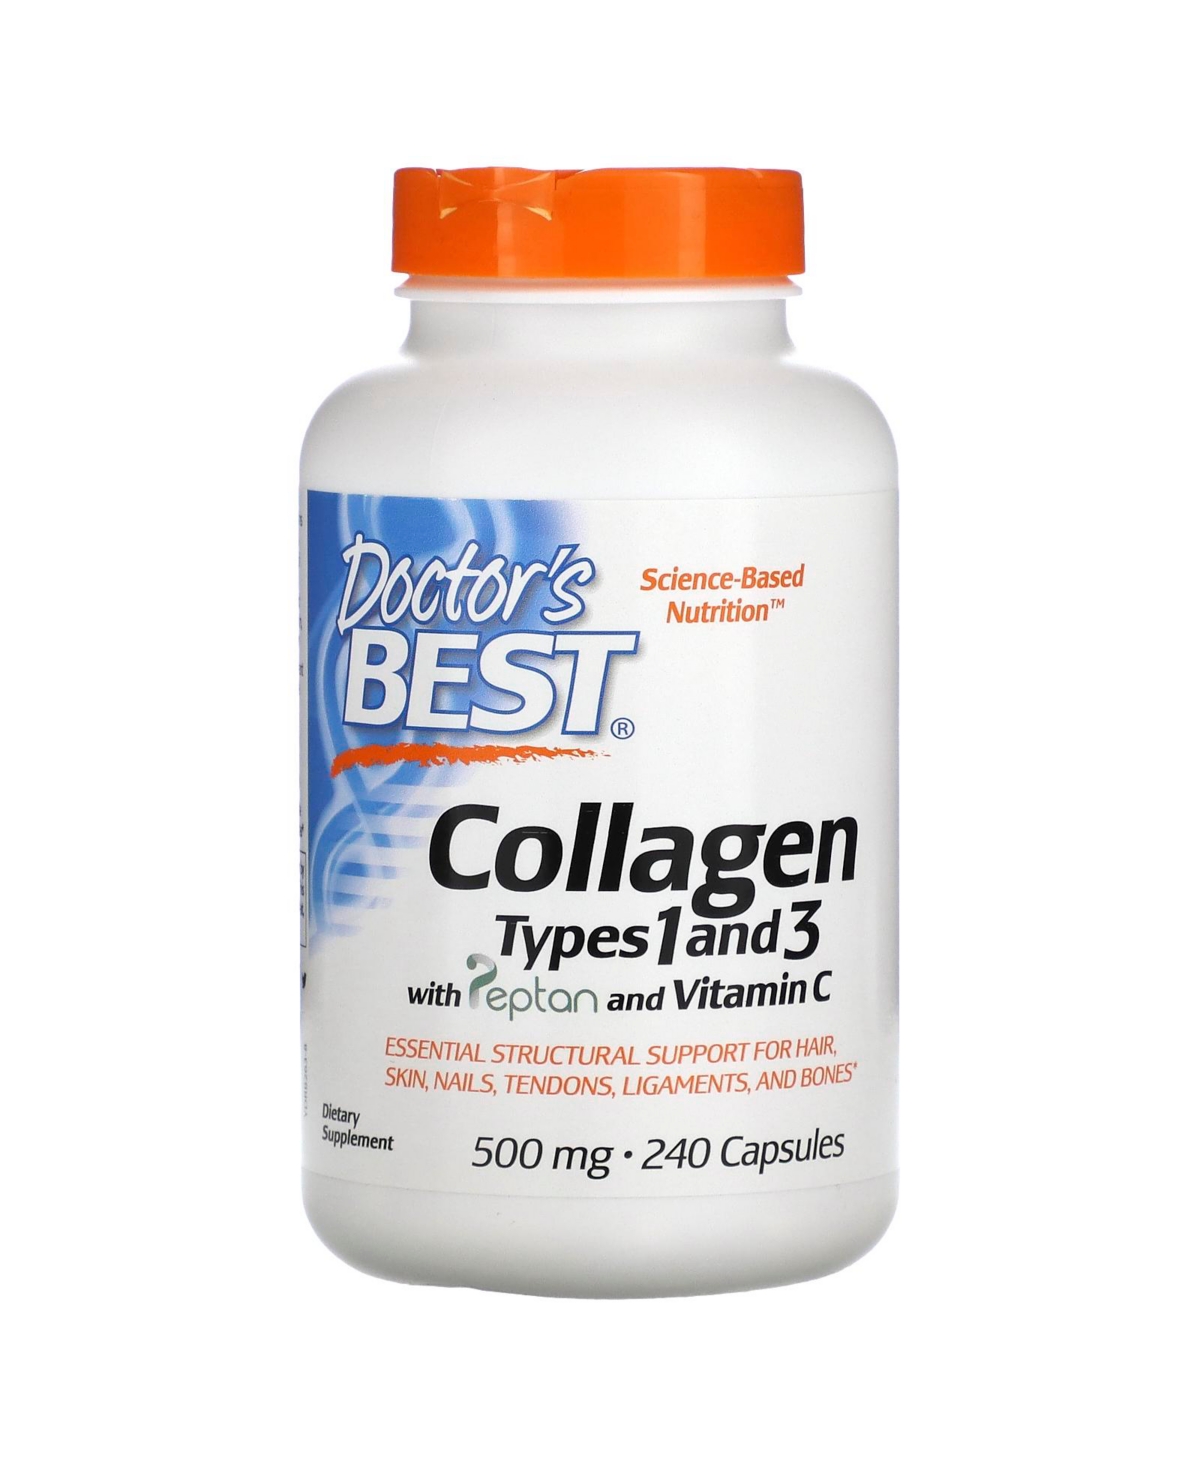 Collagen Types 1 and 3 with Pep tan and Vitamin C 500 mg - 240 Capsules (125 - Assorted Pre-Pack